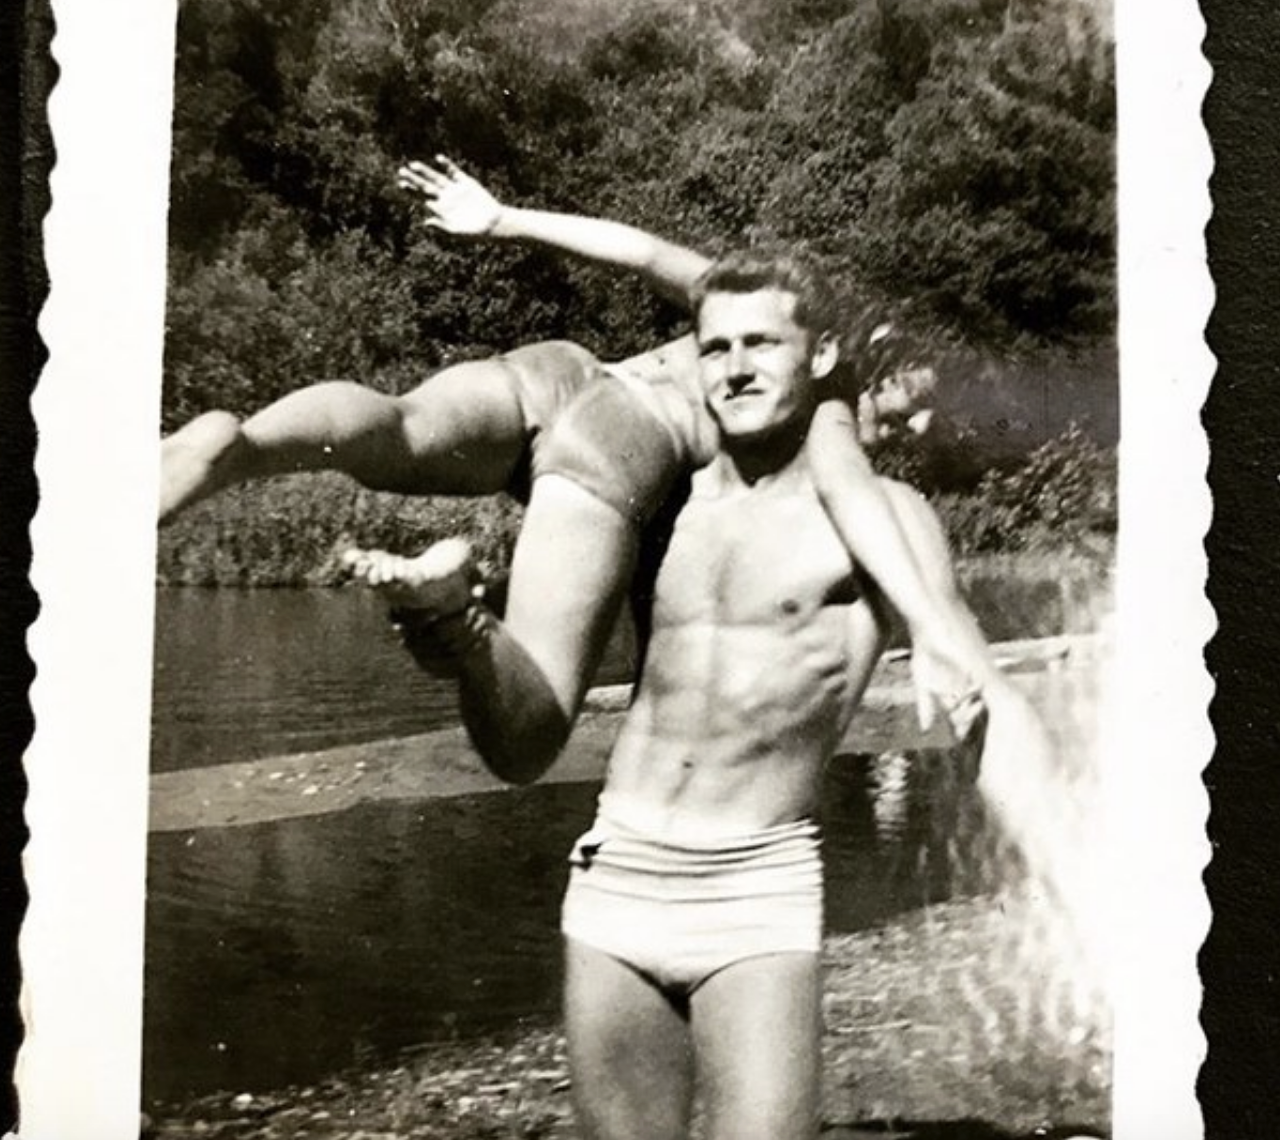 A young man carrying another man in a bathing suit